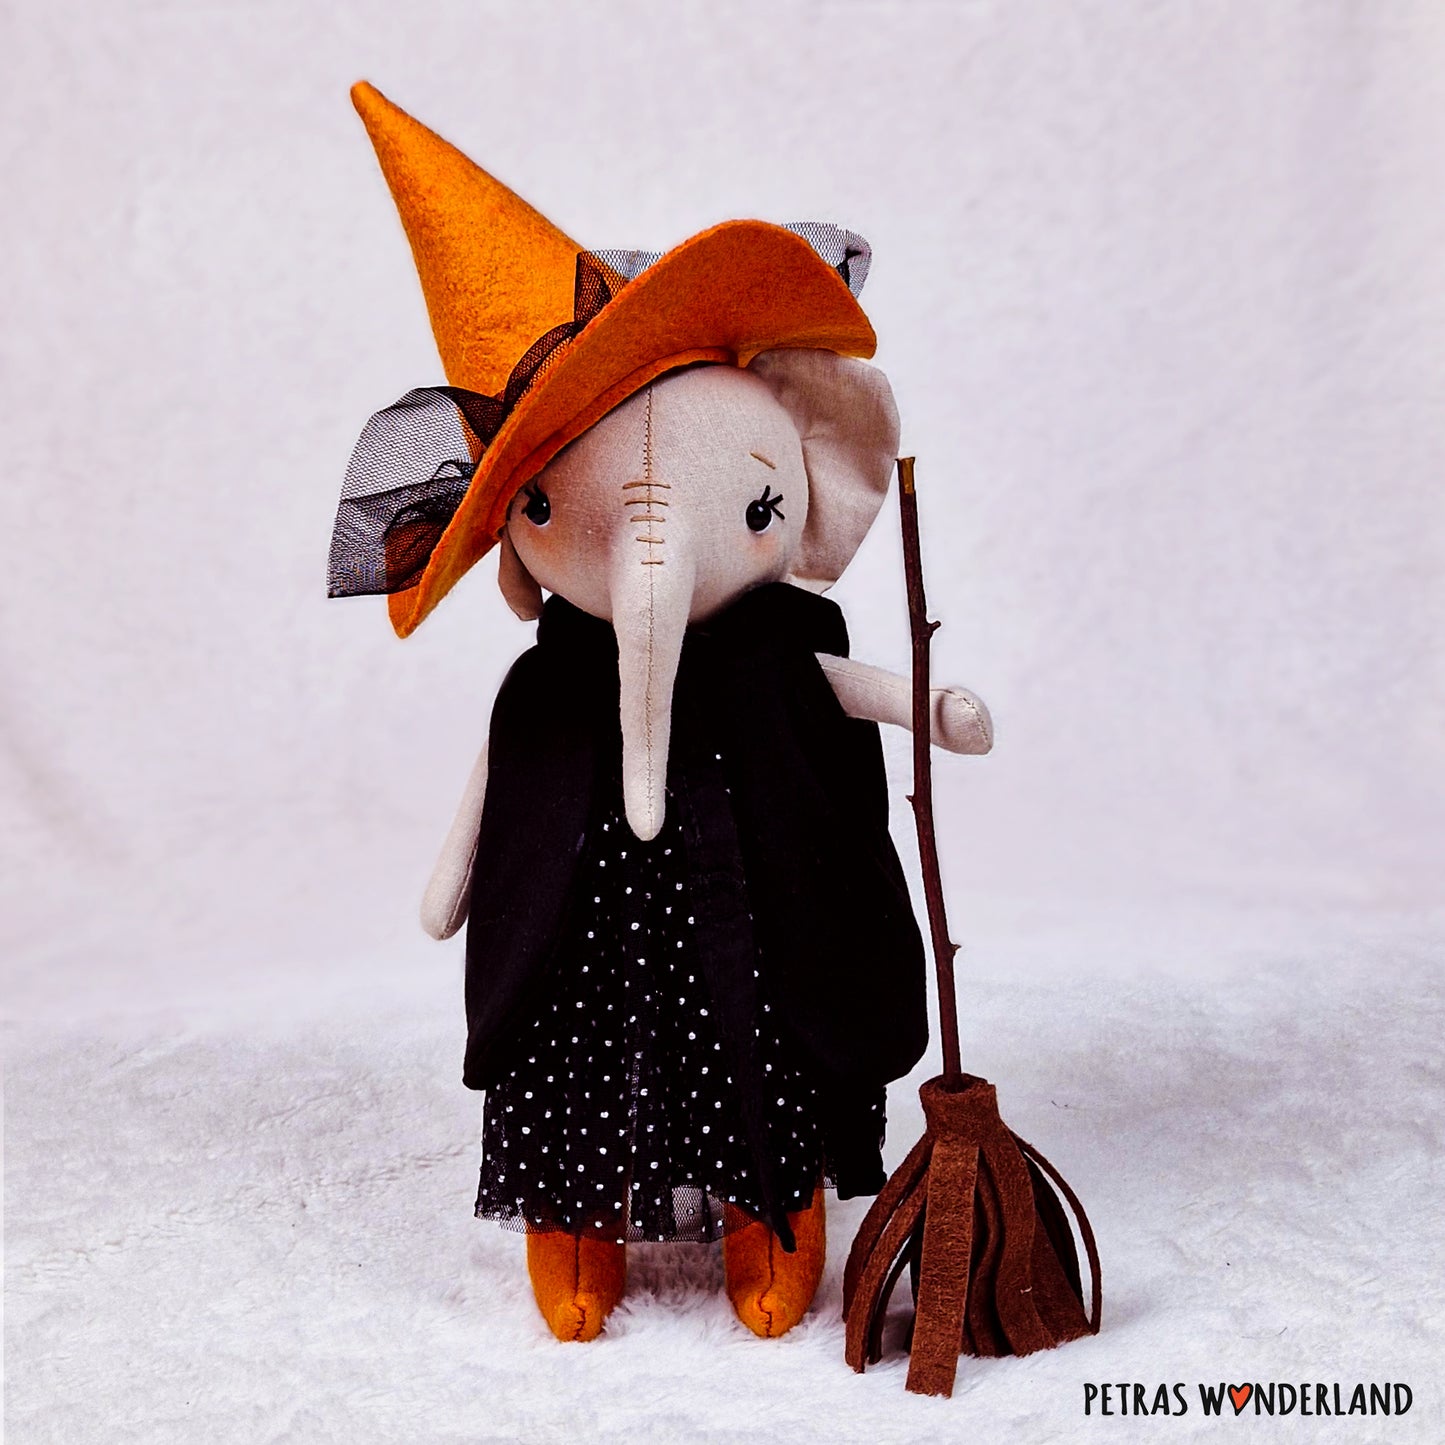 Witch clothes and accessories - sewing patterns and tutorials